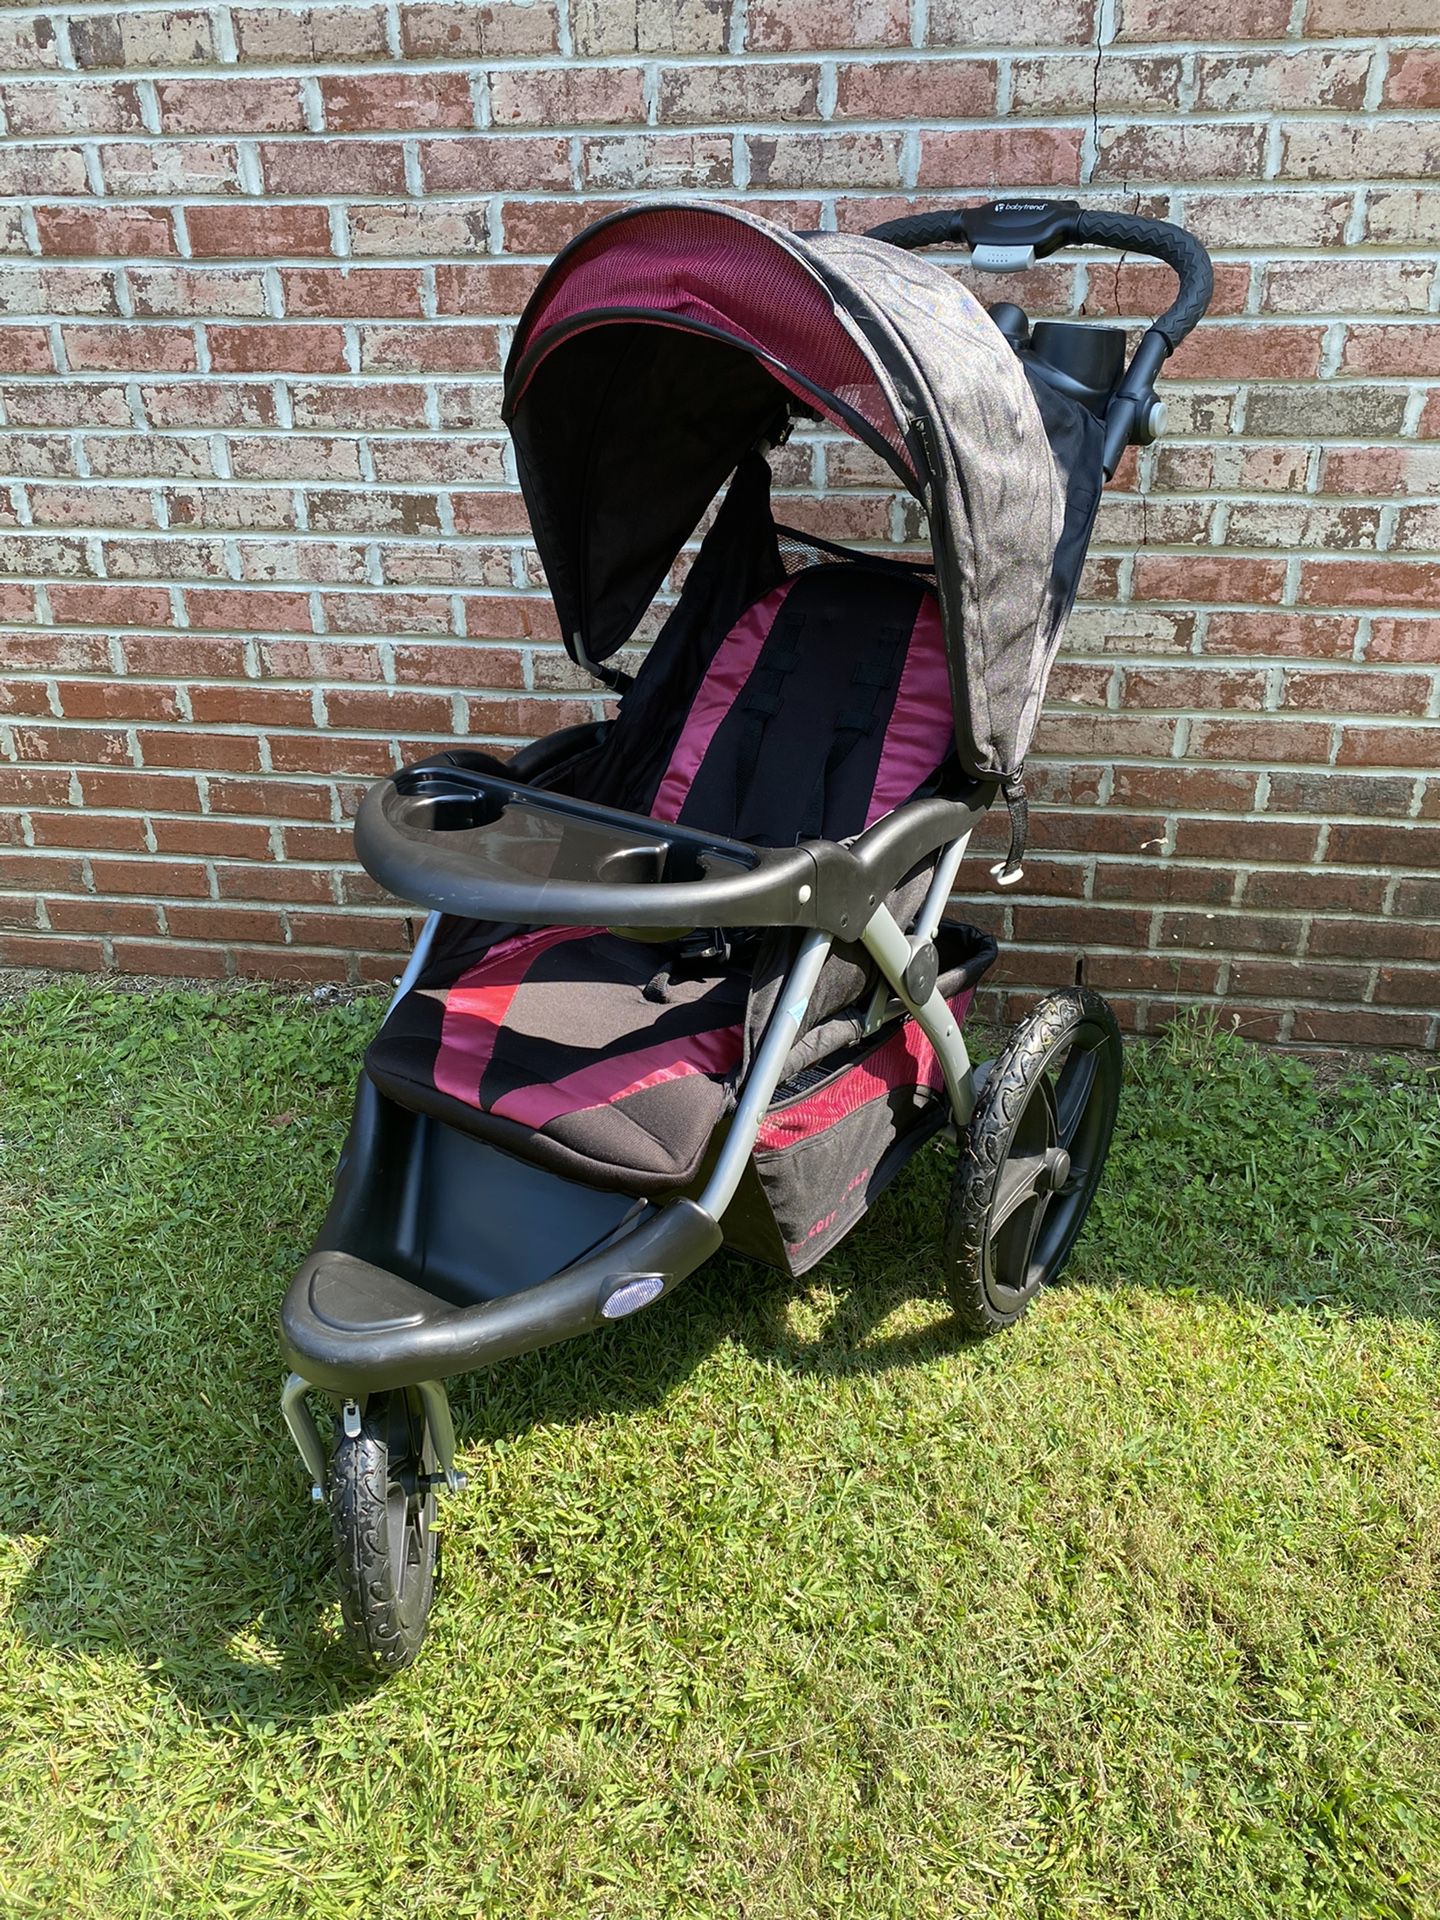  Baby trend pink expedition stroller